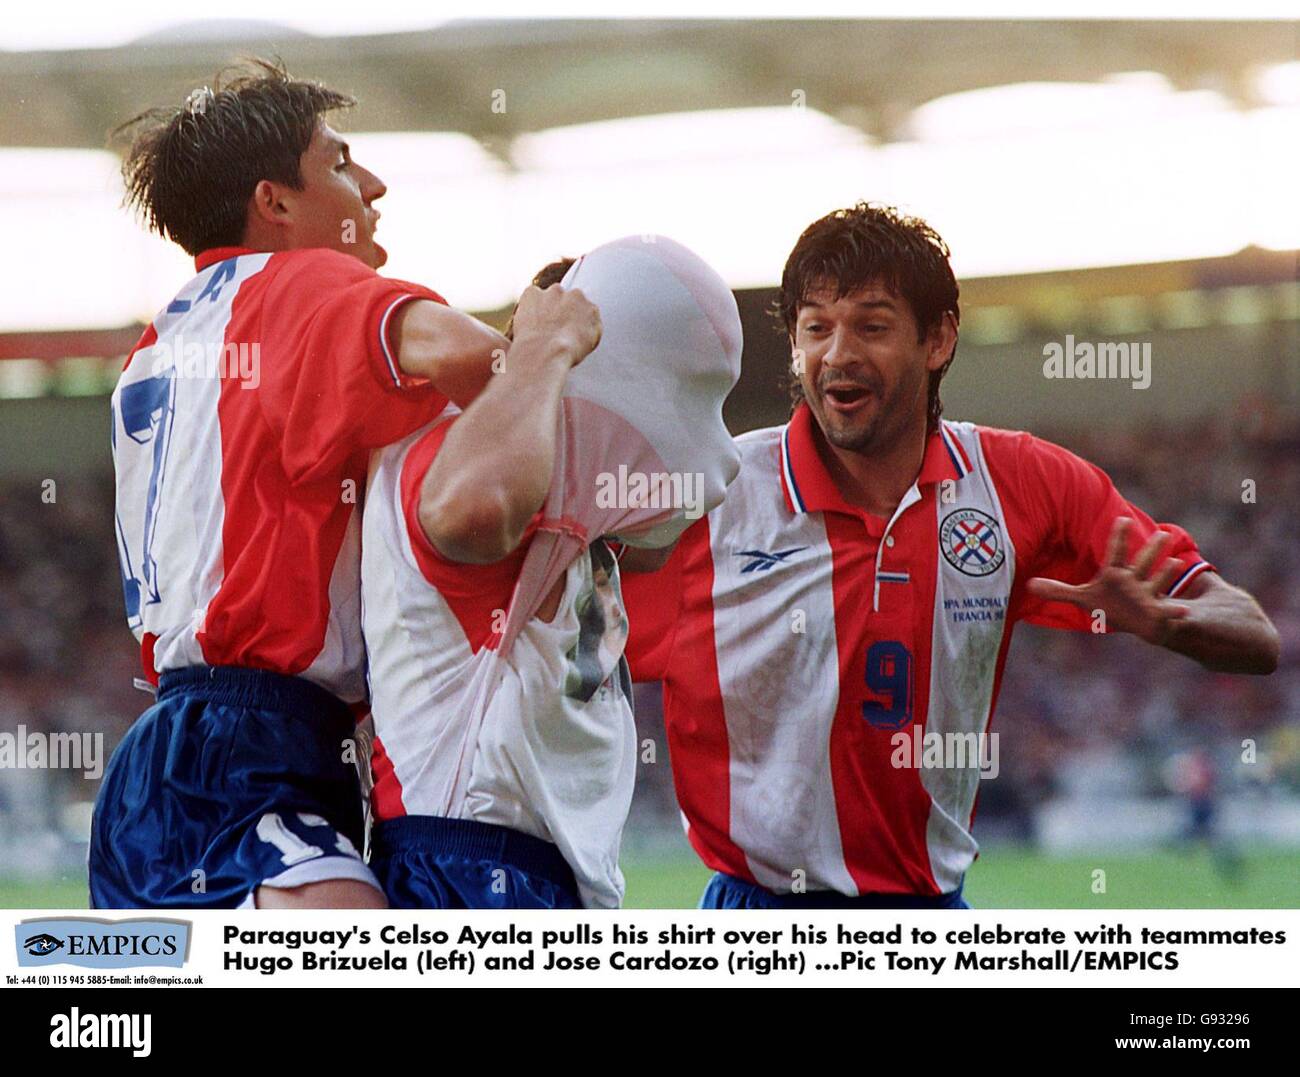 Paraguay's Celso Ayala (centre) pulls his shirt over his head to celebrate scoring the opening goal with teammates Hugo Brizuela (left) and Jose Cardozo (right) Stock Photo